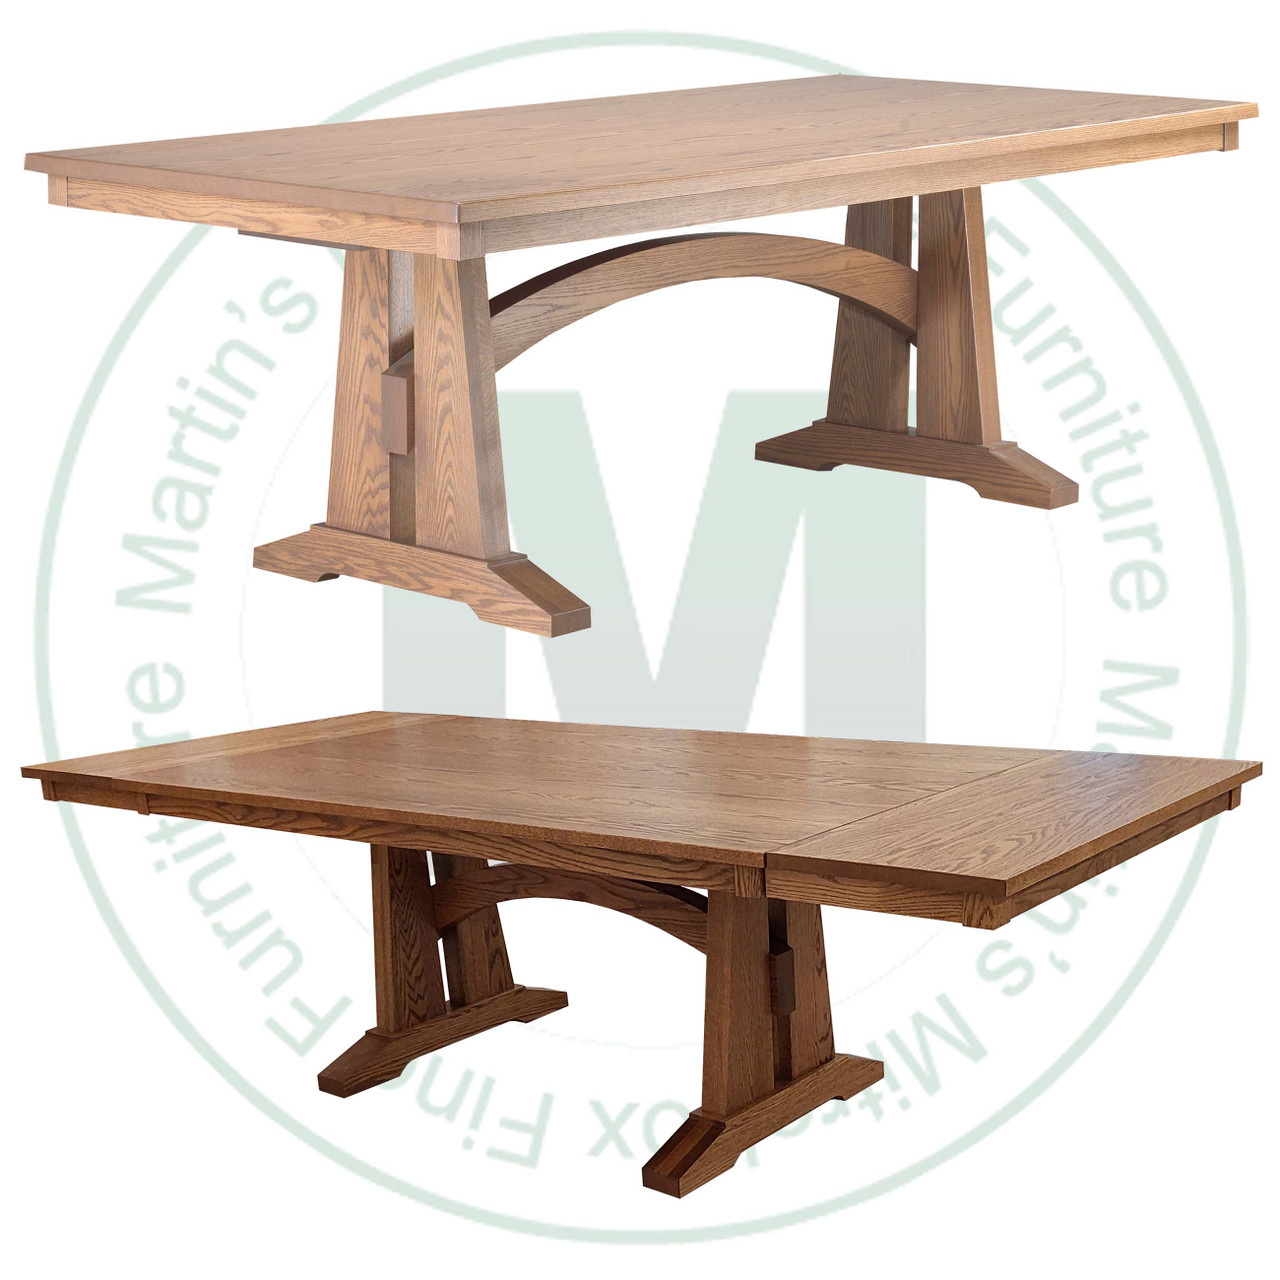 Maple Golden Gate Solid Top Pedestal Table 54''D x 120''W x 30''H And 2 - 16'' Extensions. Table Has 1.25'' Thick Top